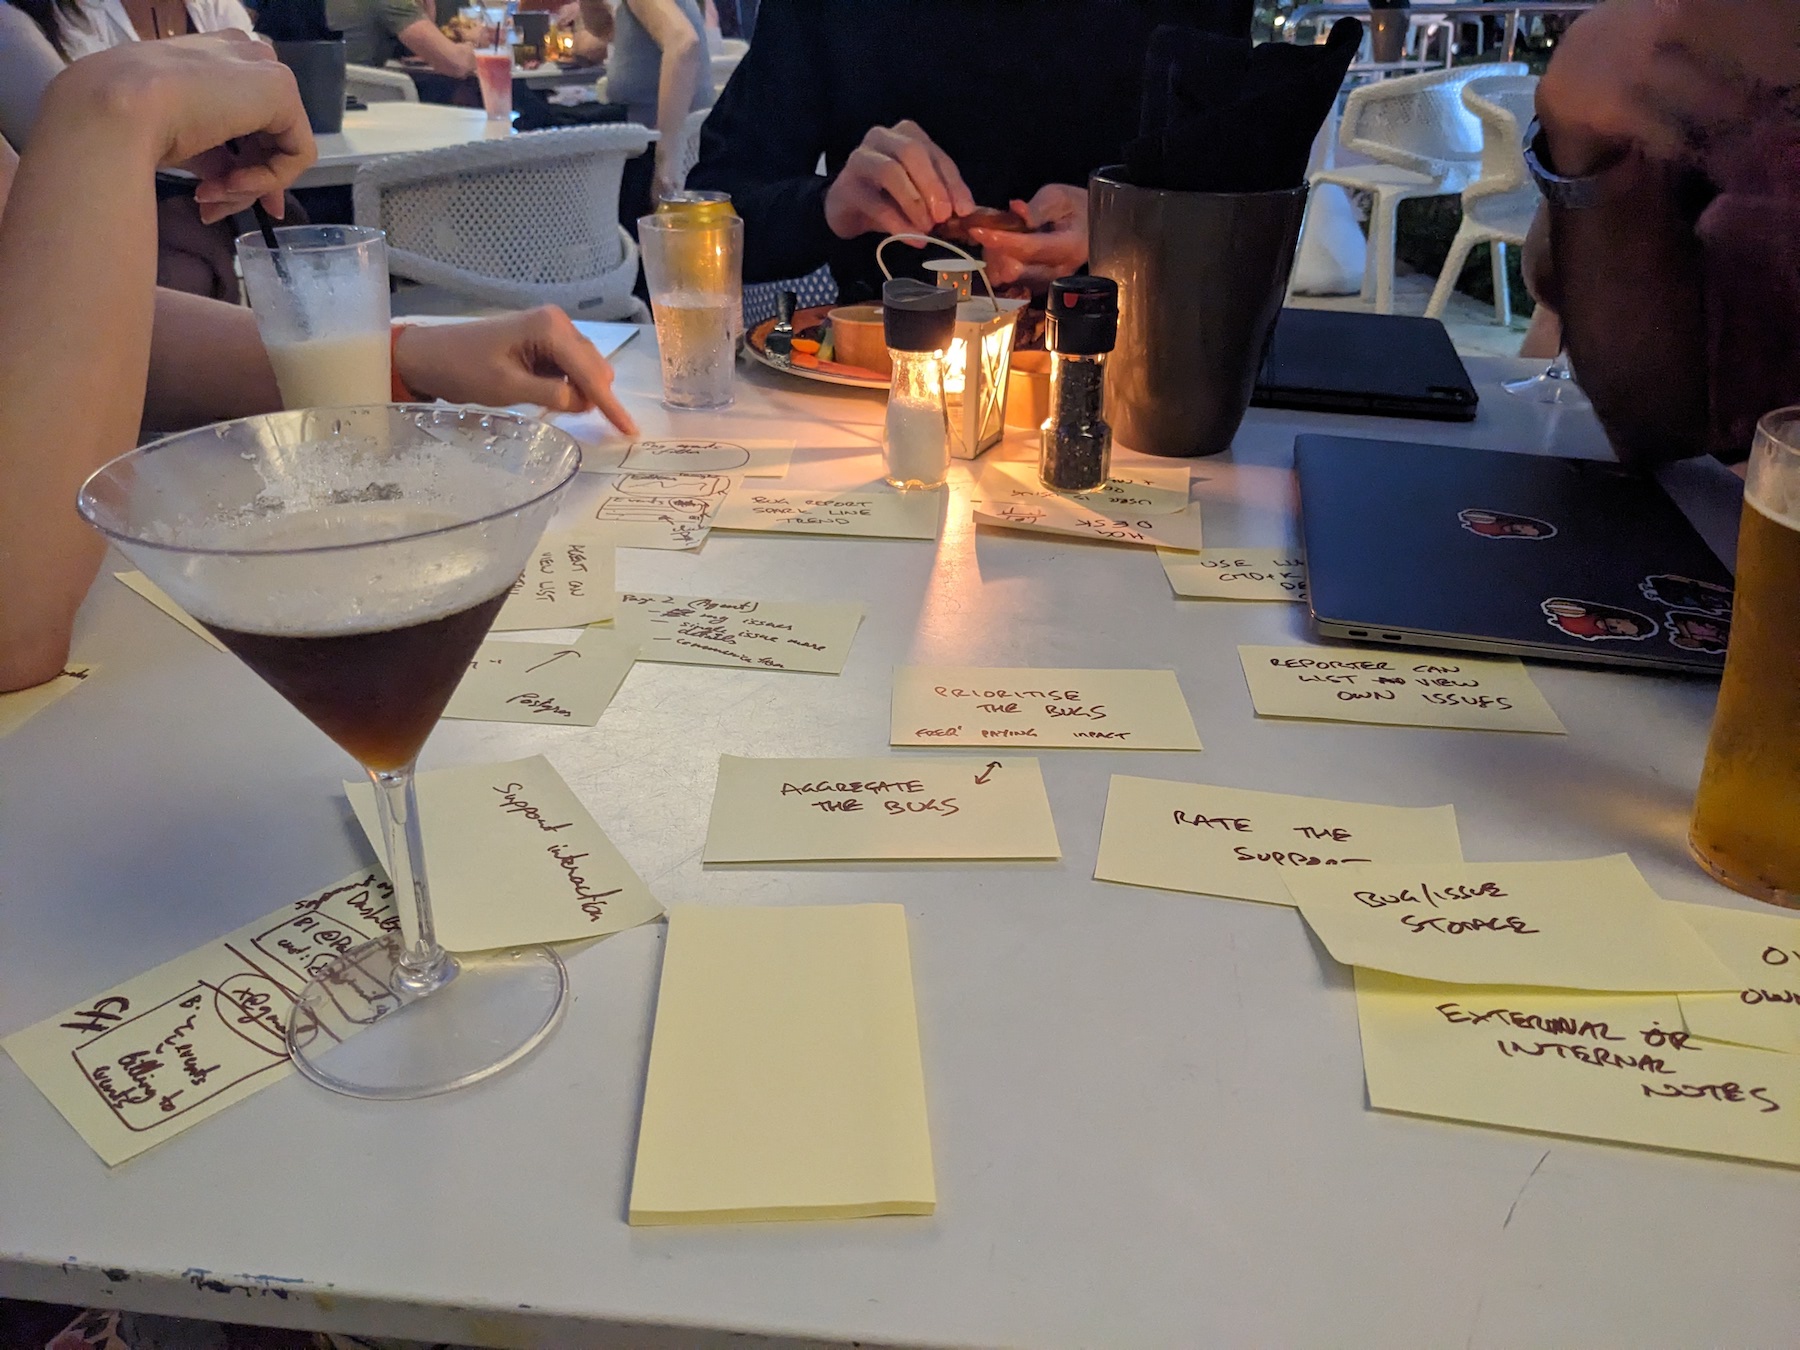 a table with post-it notes on the surface